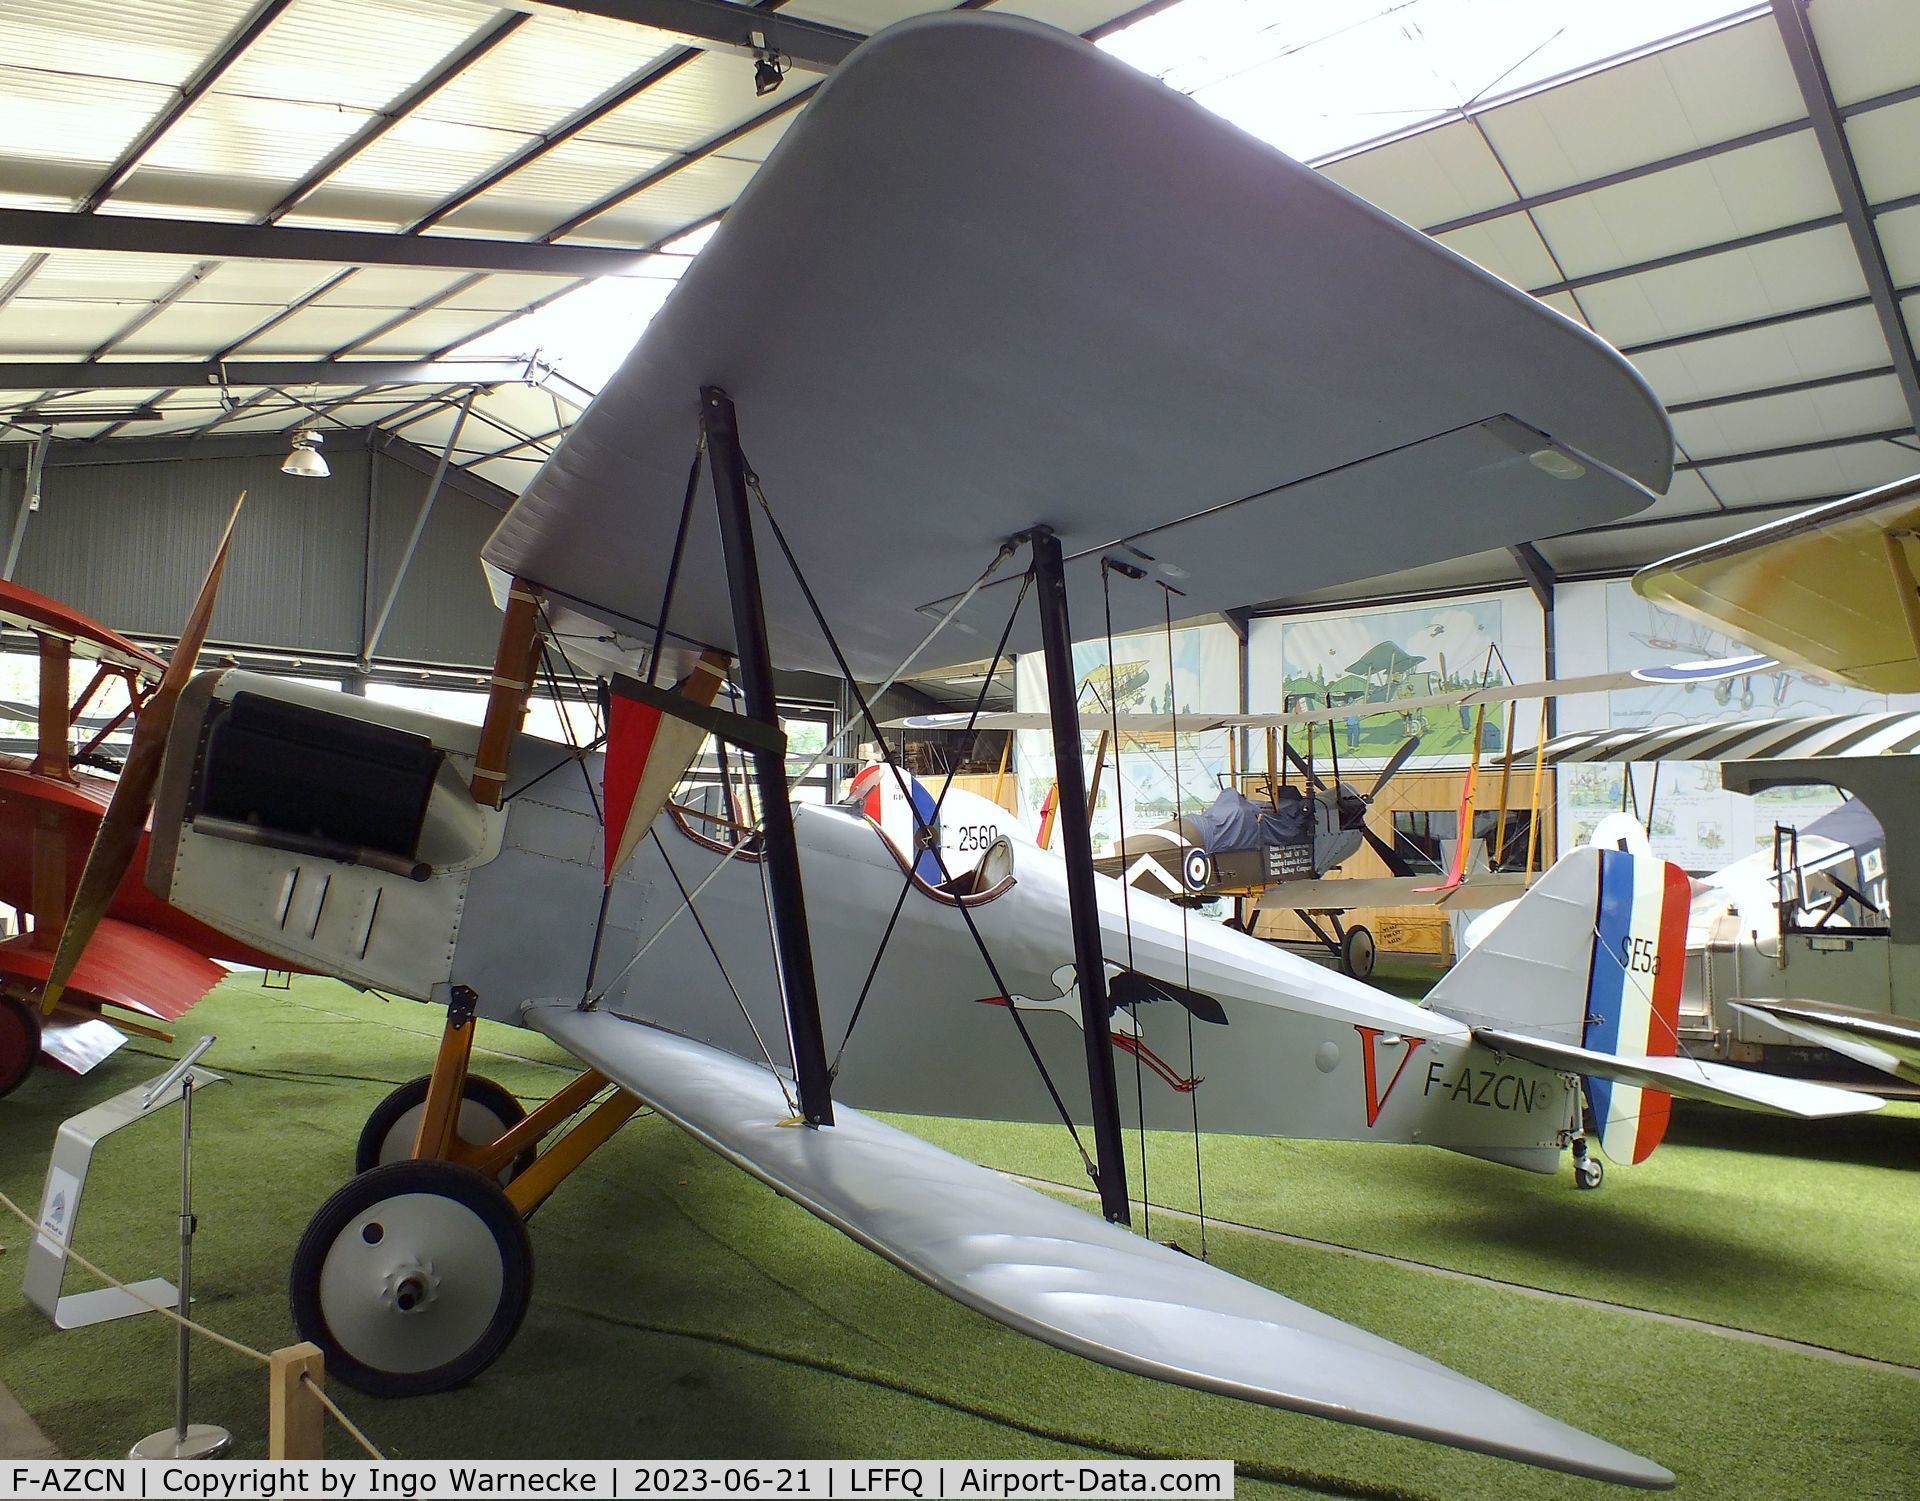 F-AZCN, Royal Aircraft Factory SE-5A Replica C/N 02, Amicale Jean Salis R.A.F. S.E.5 two-seater look-alike (converted from a Stampe SV-4) at the Musee Volant Salis/Aero Vintage Academy, Cerny